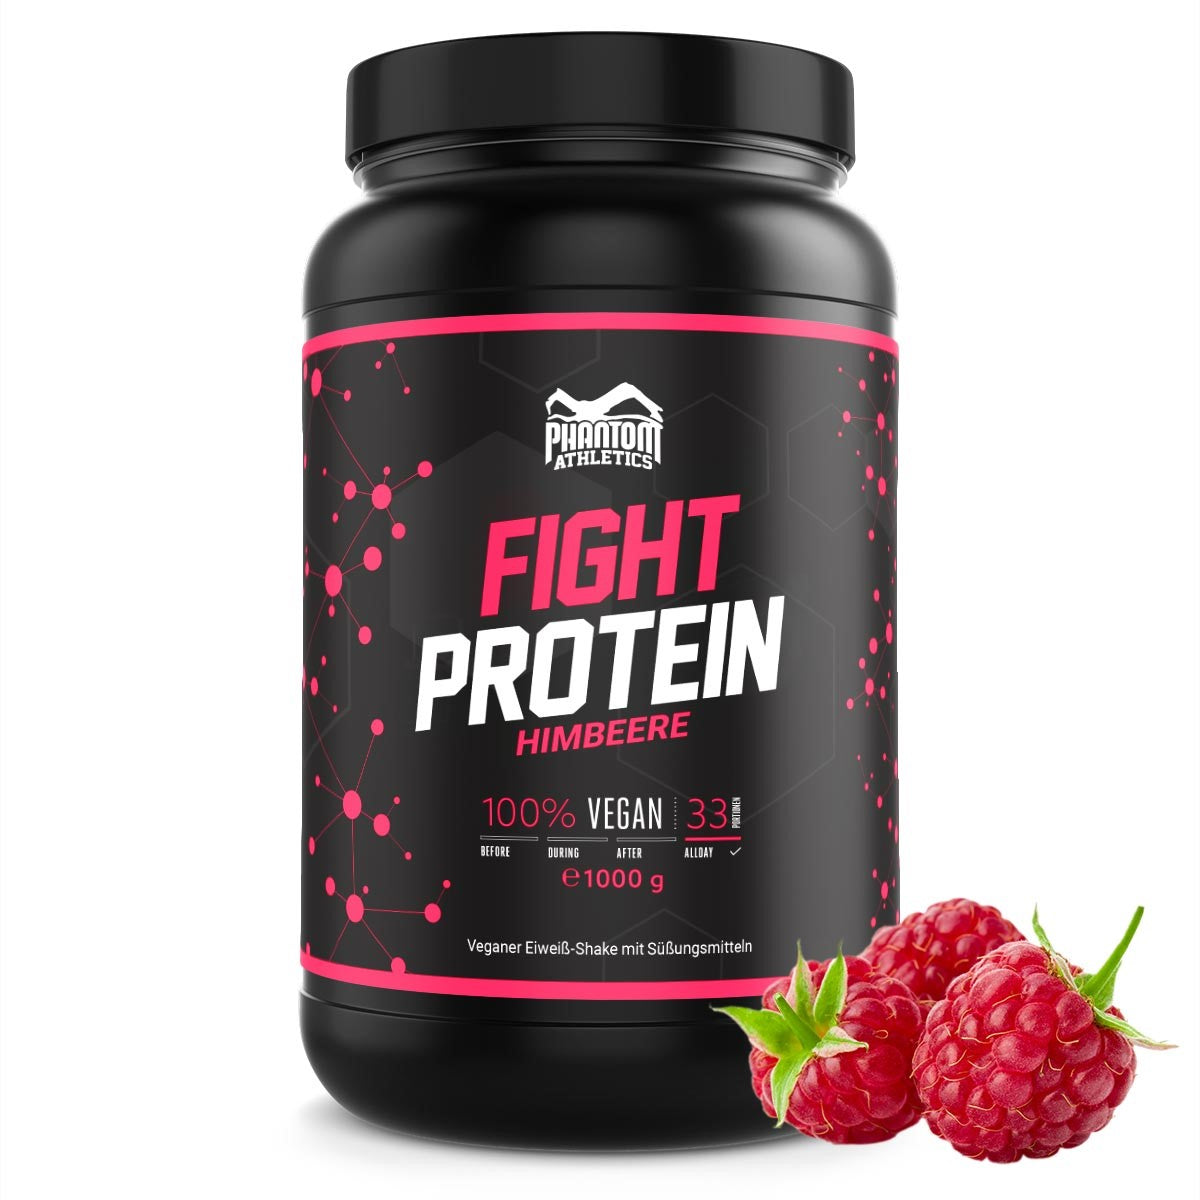 FIGHT Protein - Himbeere - 1000g